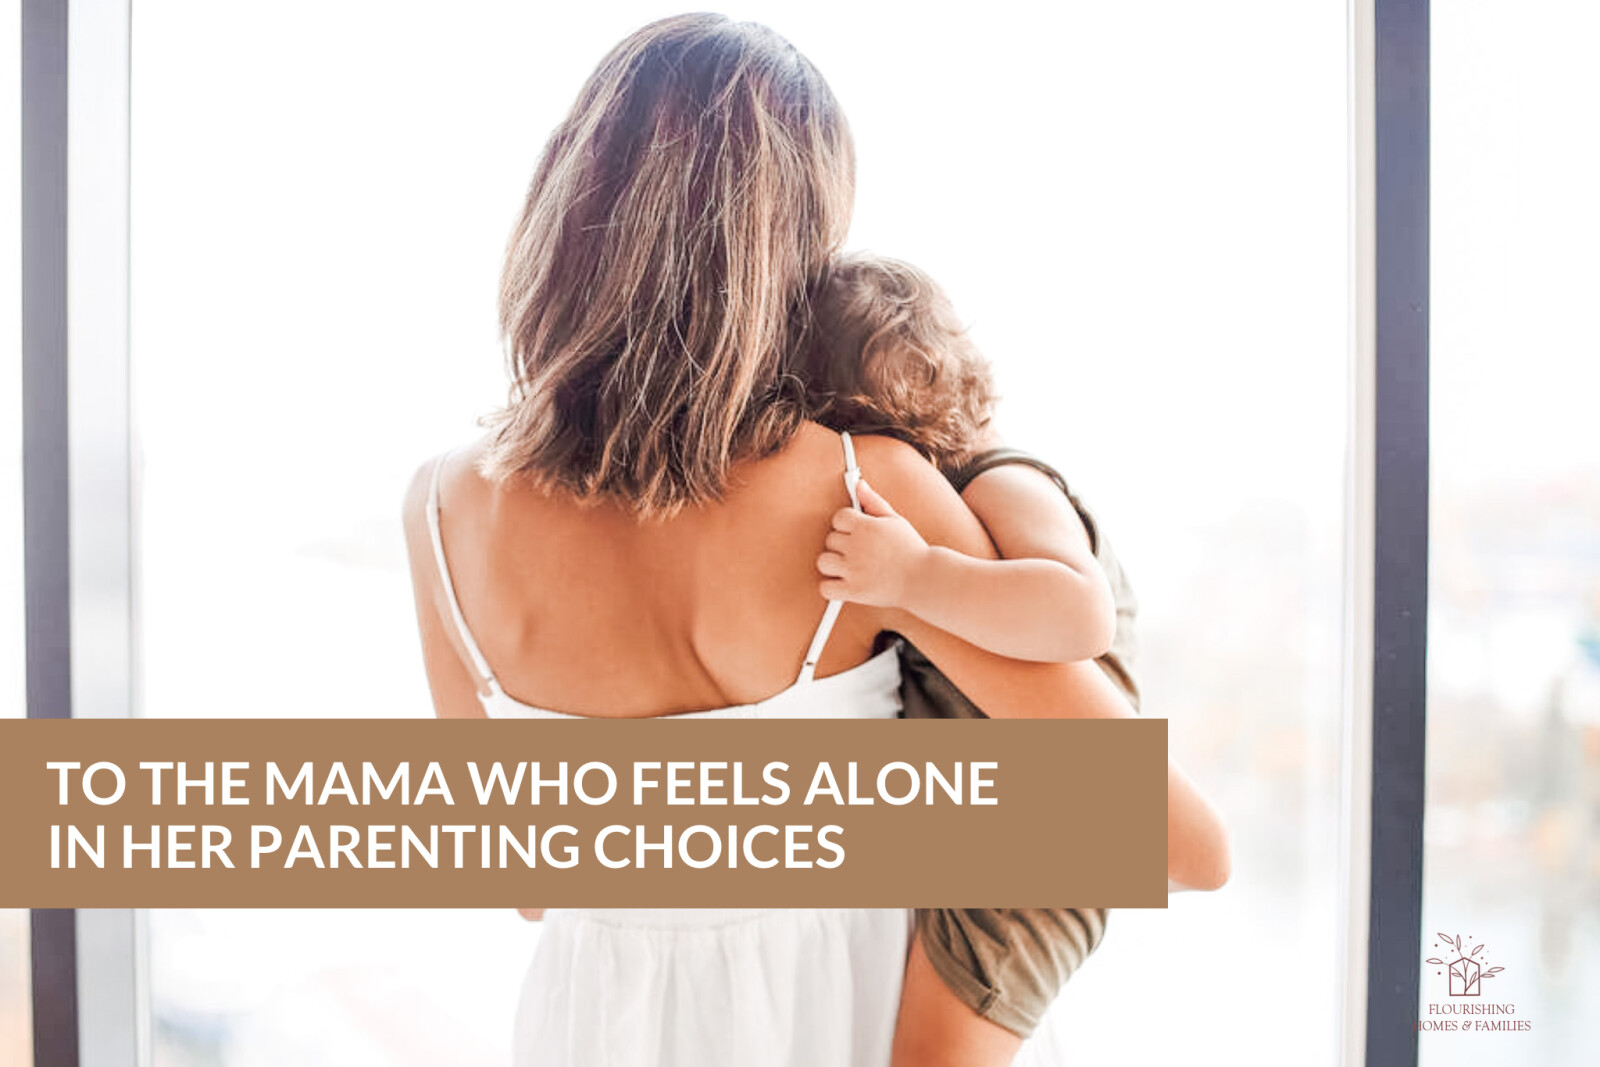 TO THE MAMA WHO FEELS ALONE IN HER PARENTING CHOICES